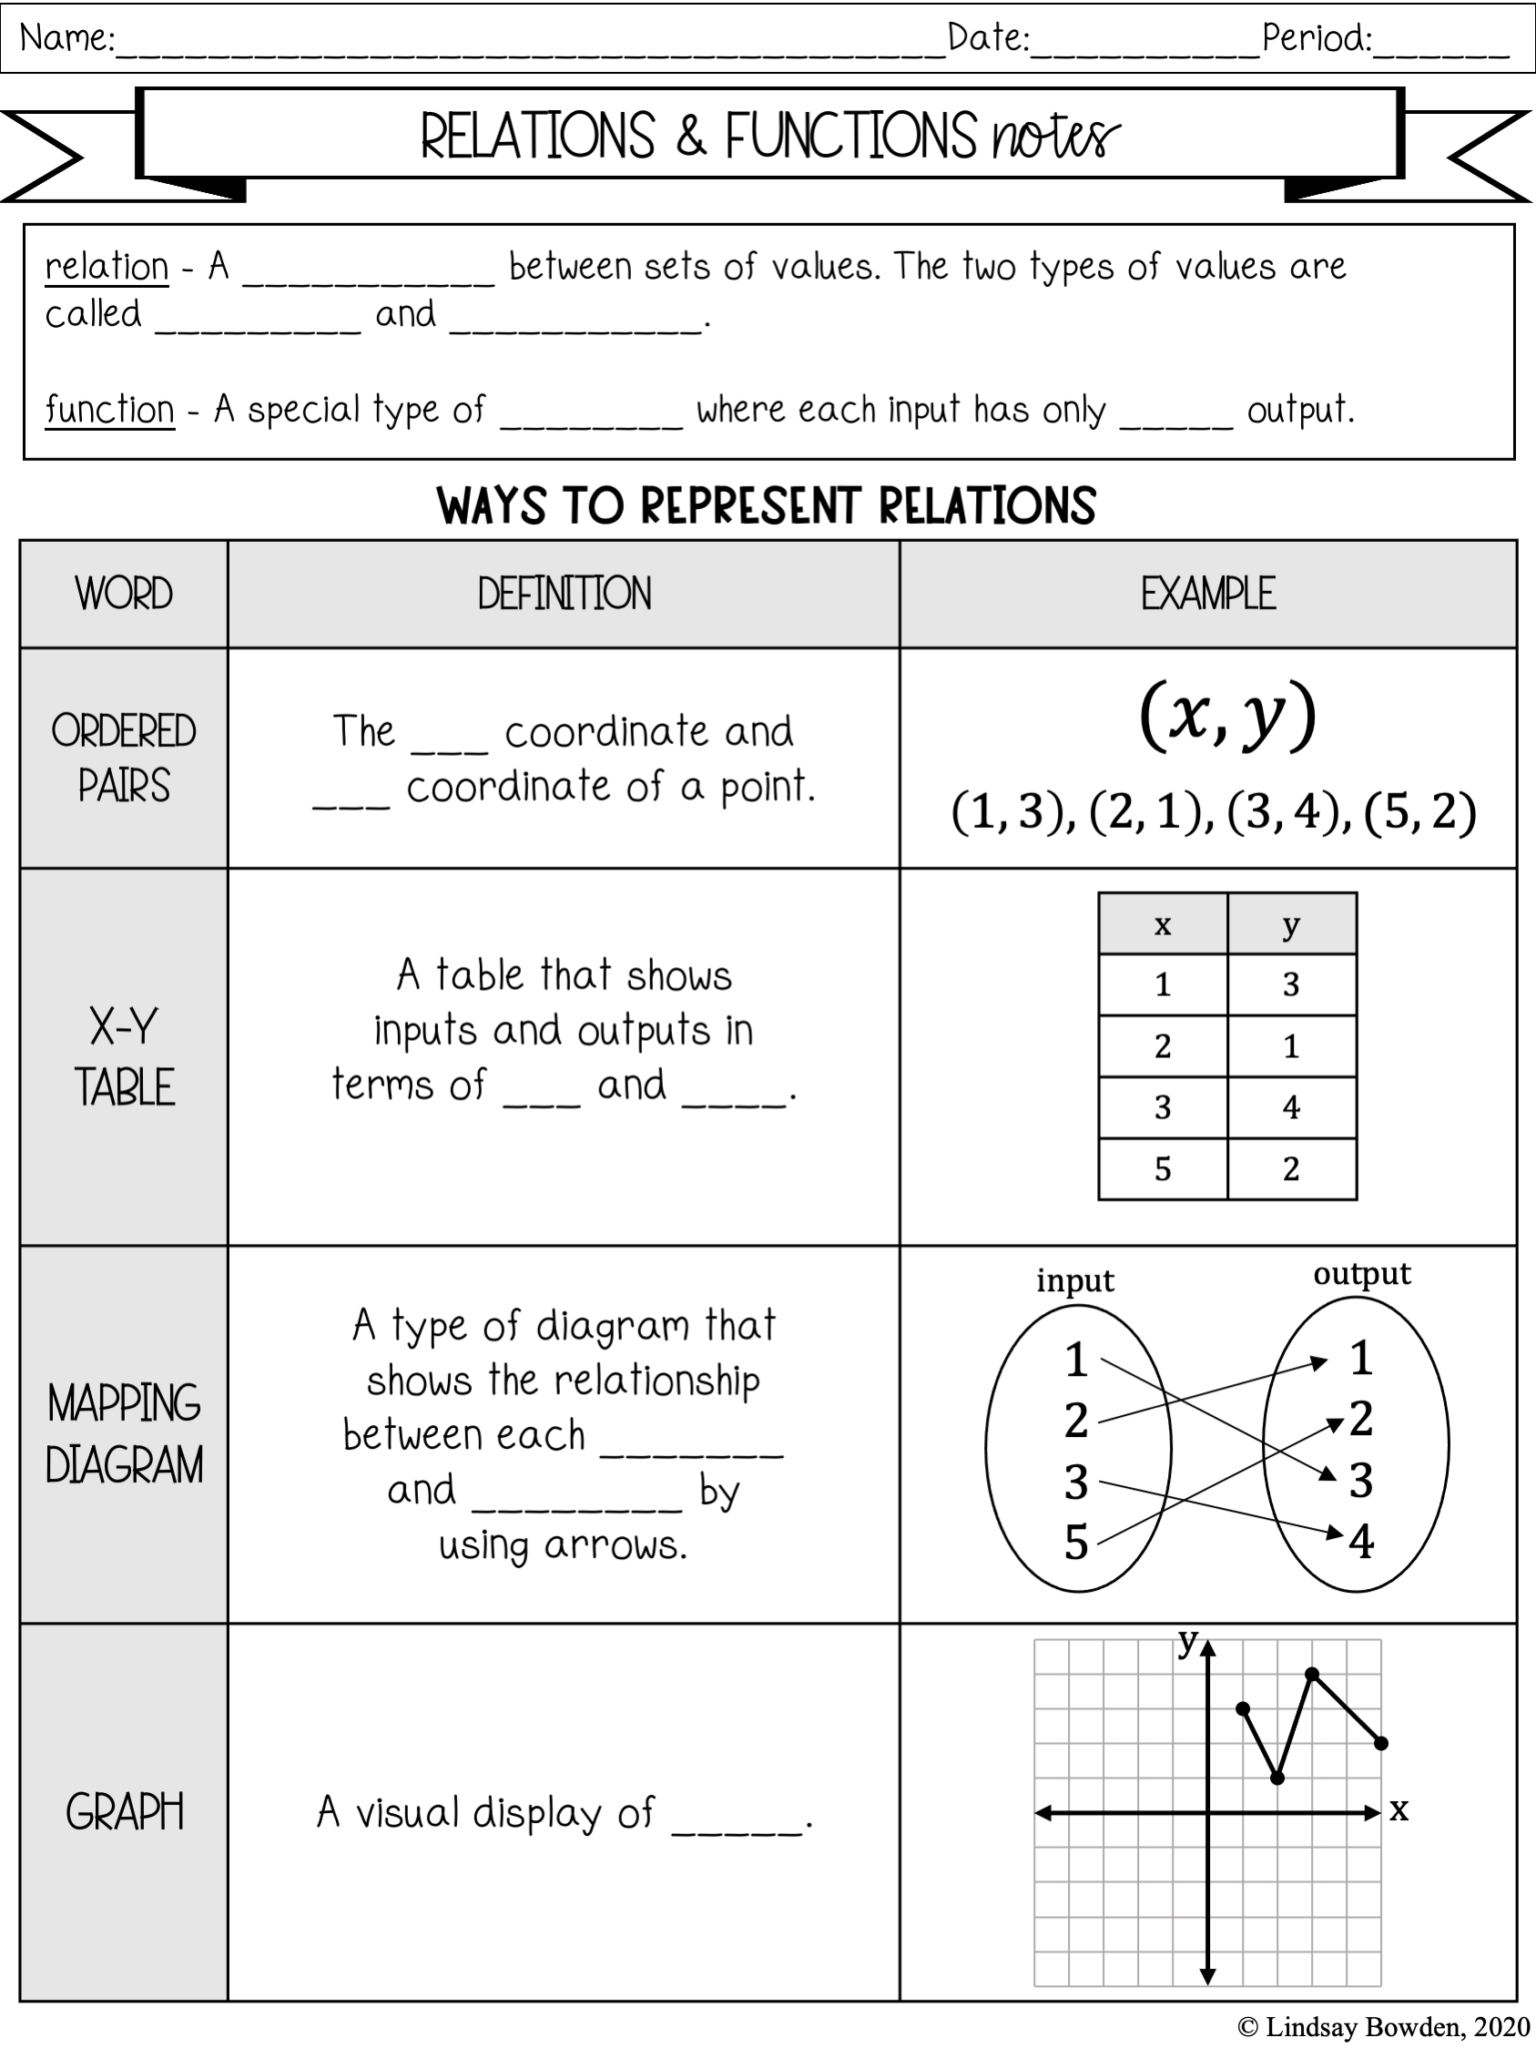 Relations And Functions Worksheet Answers